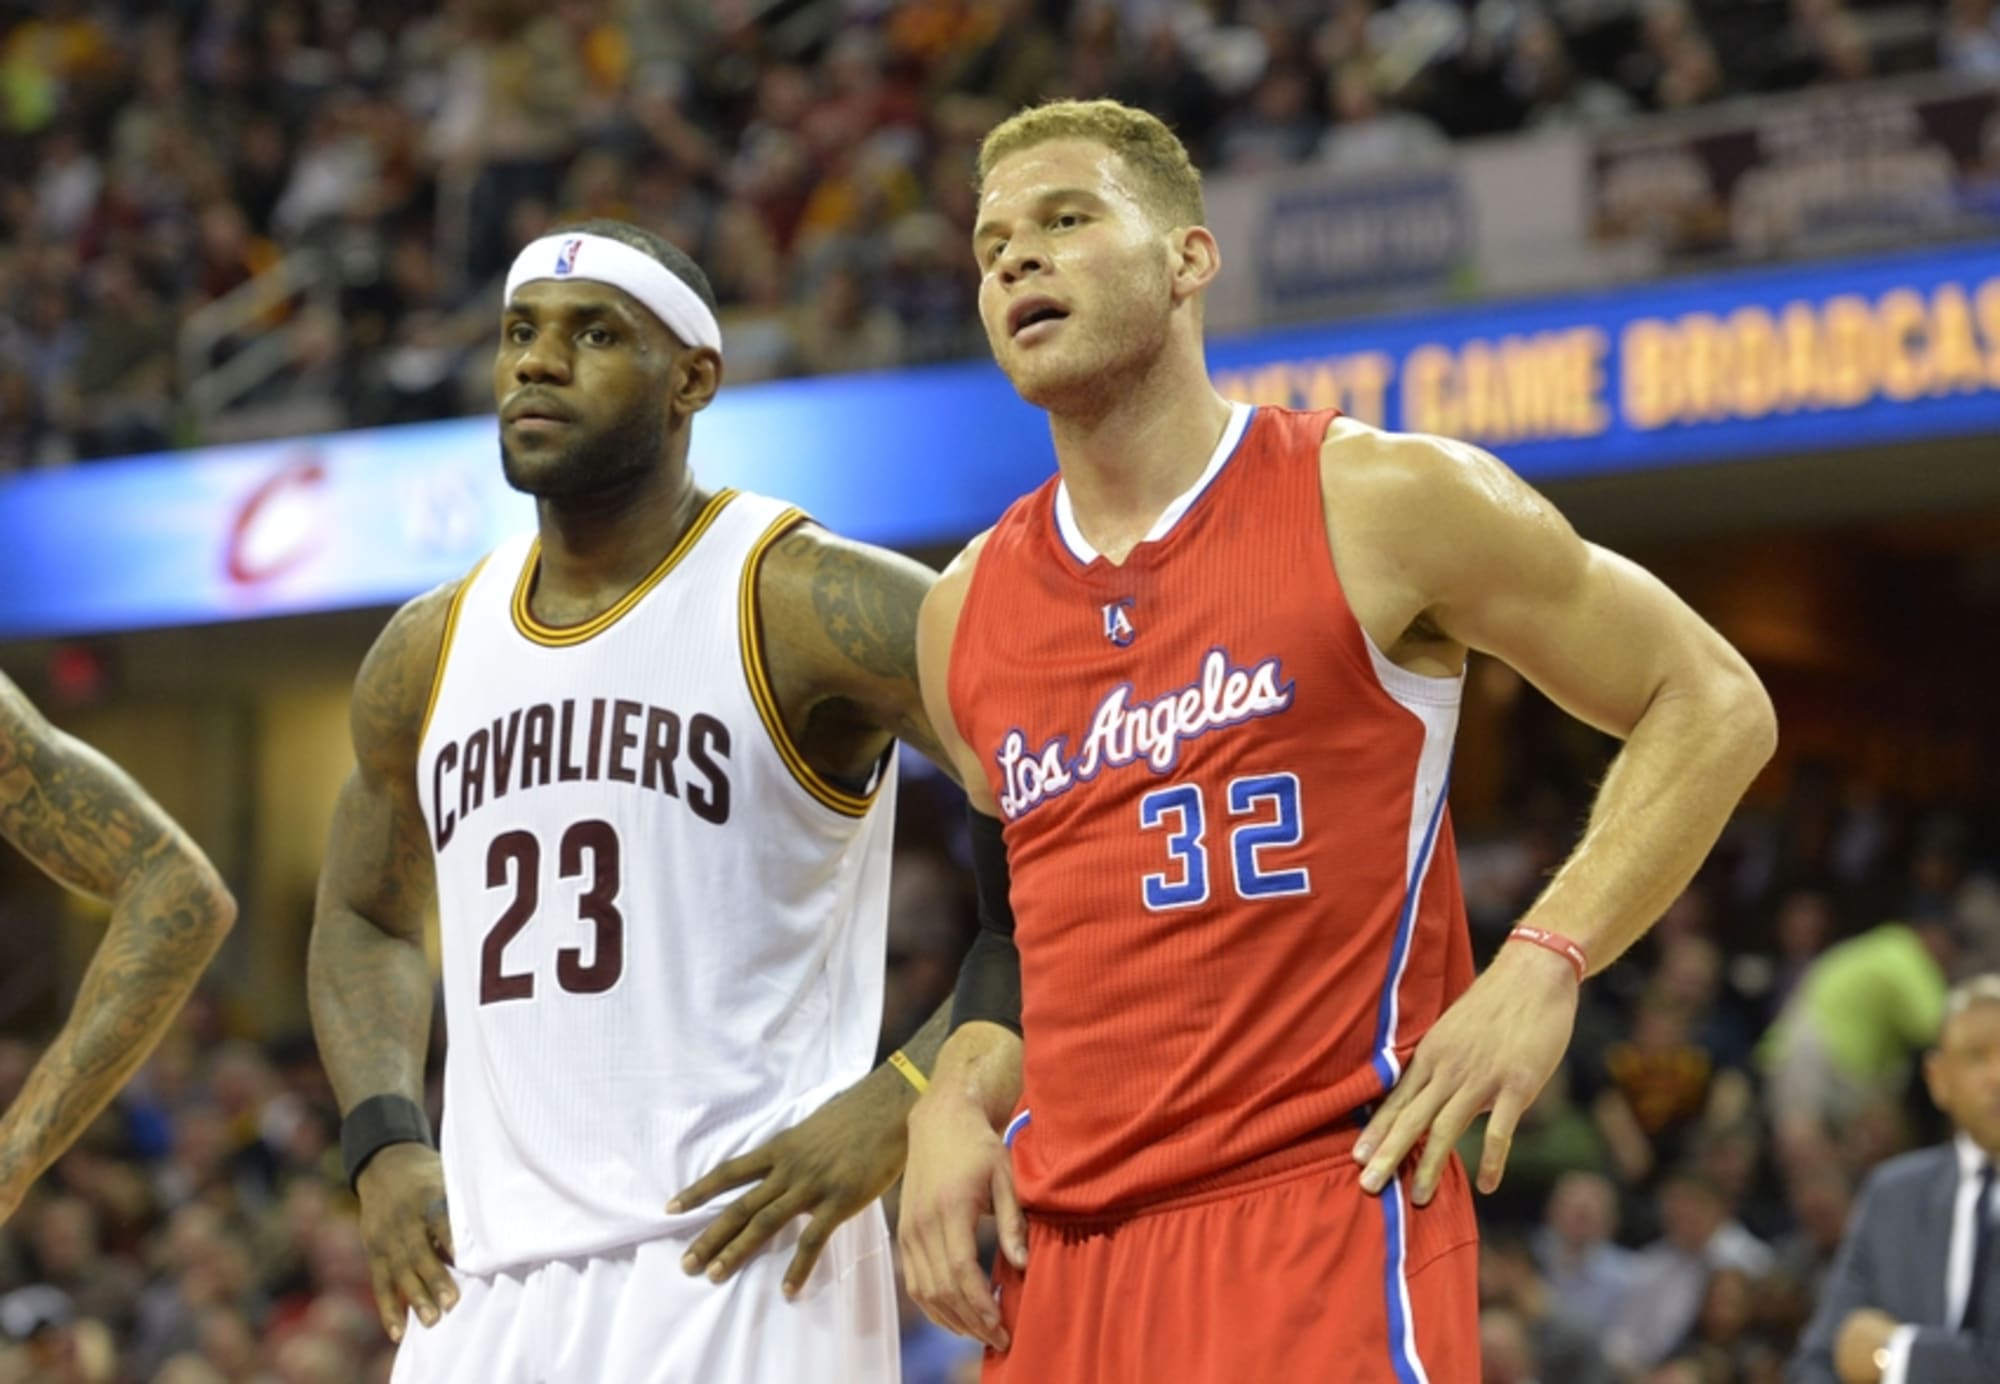 L.A. Clippers star Blake Griffin to undergo surgery to remove